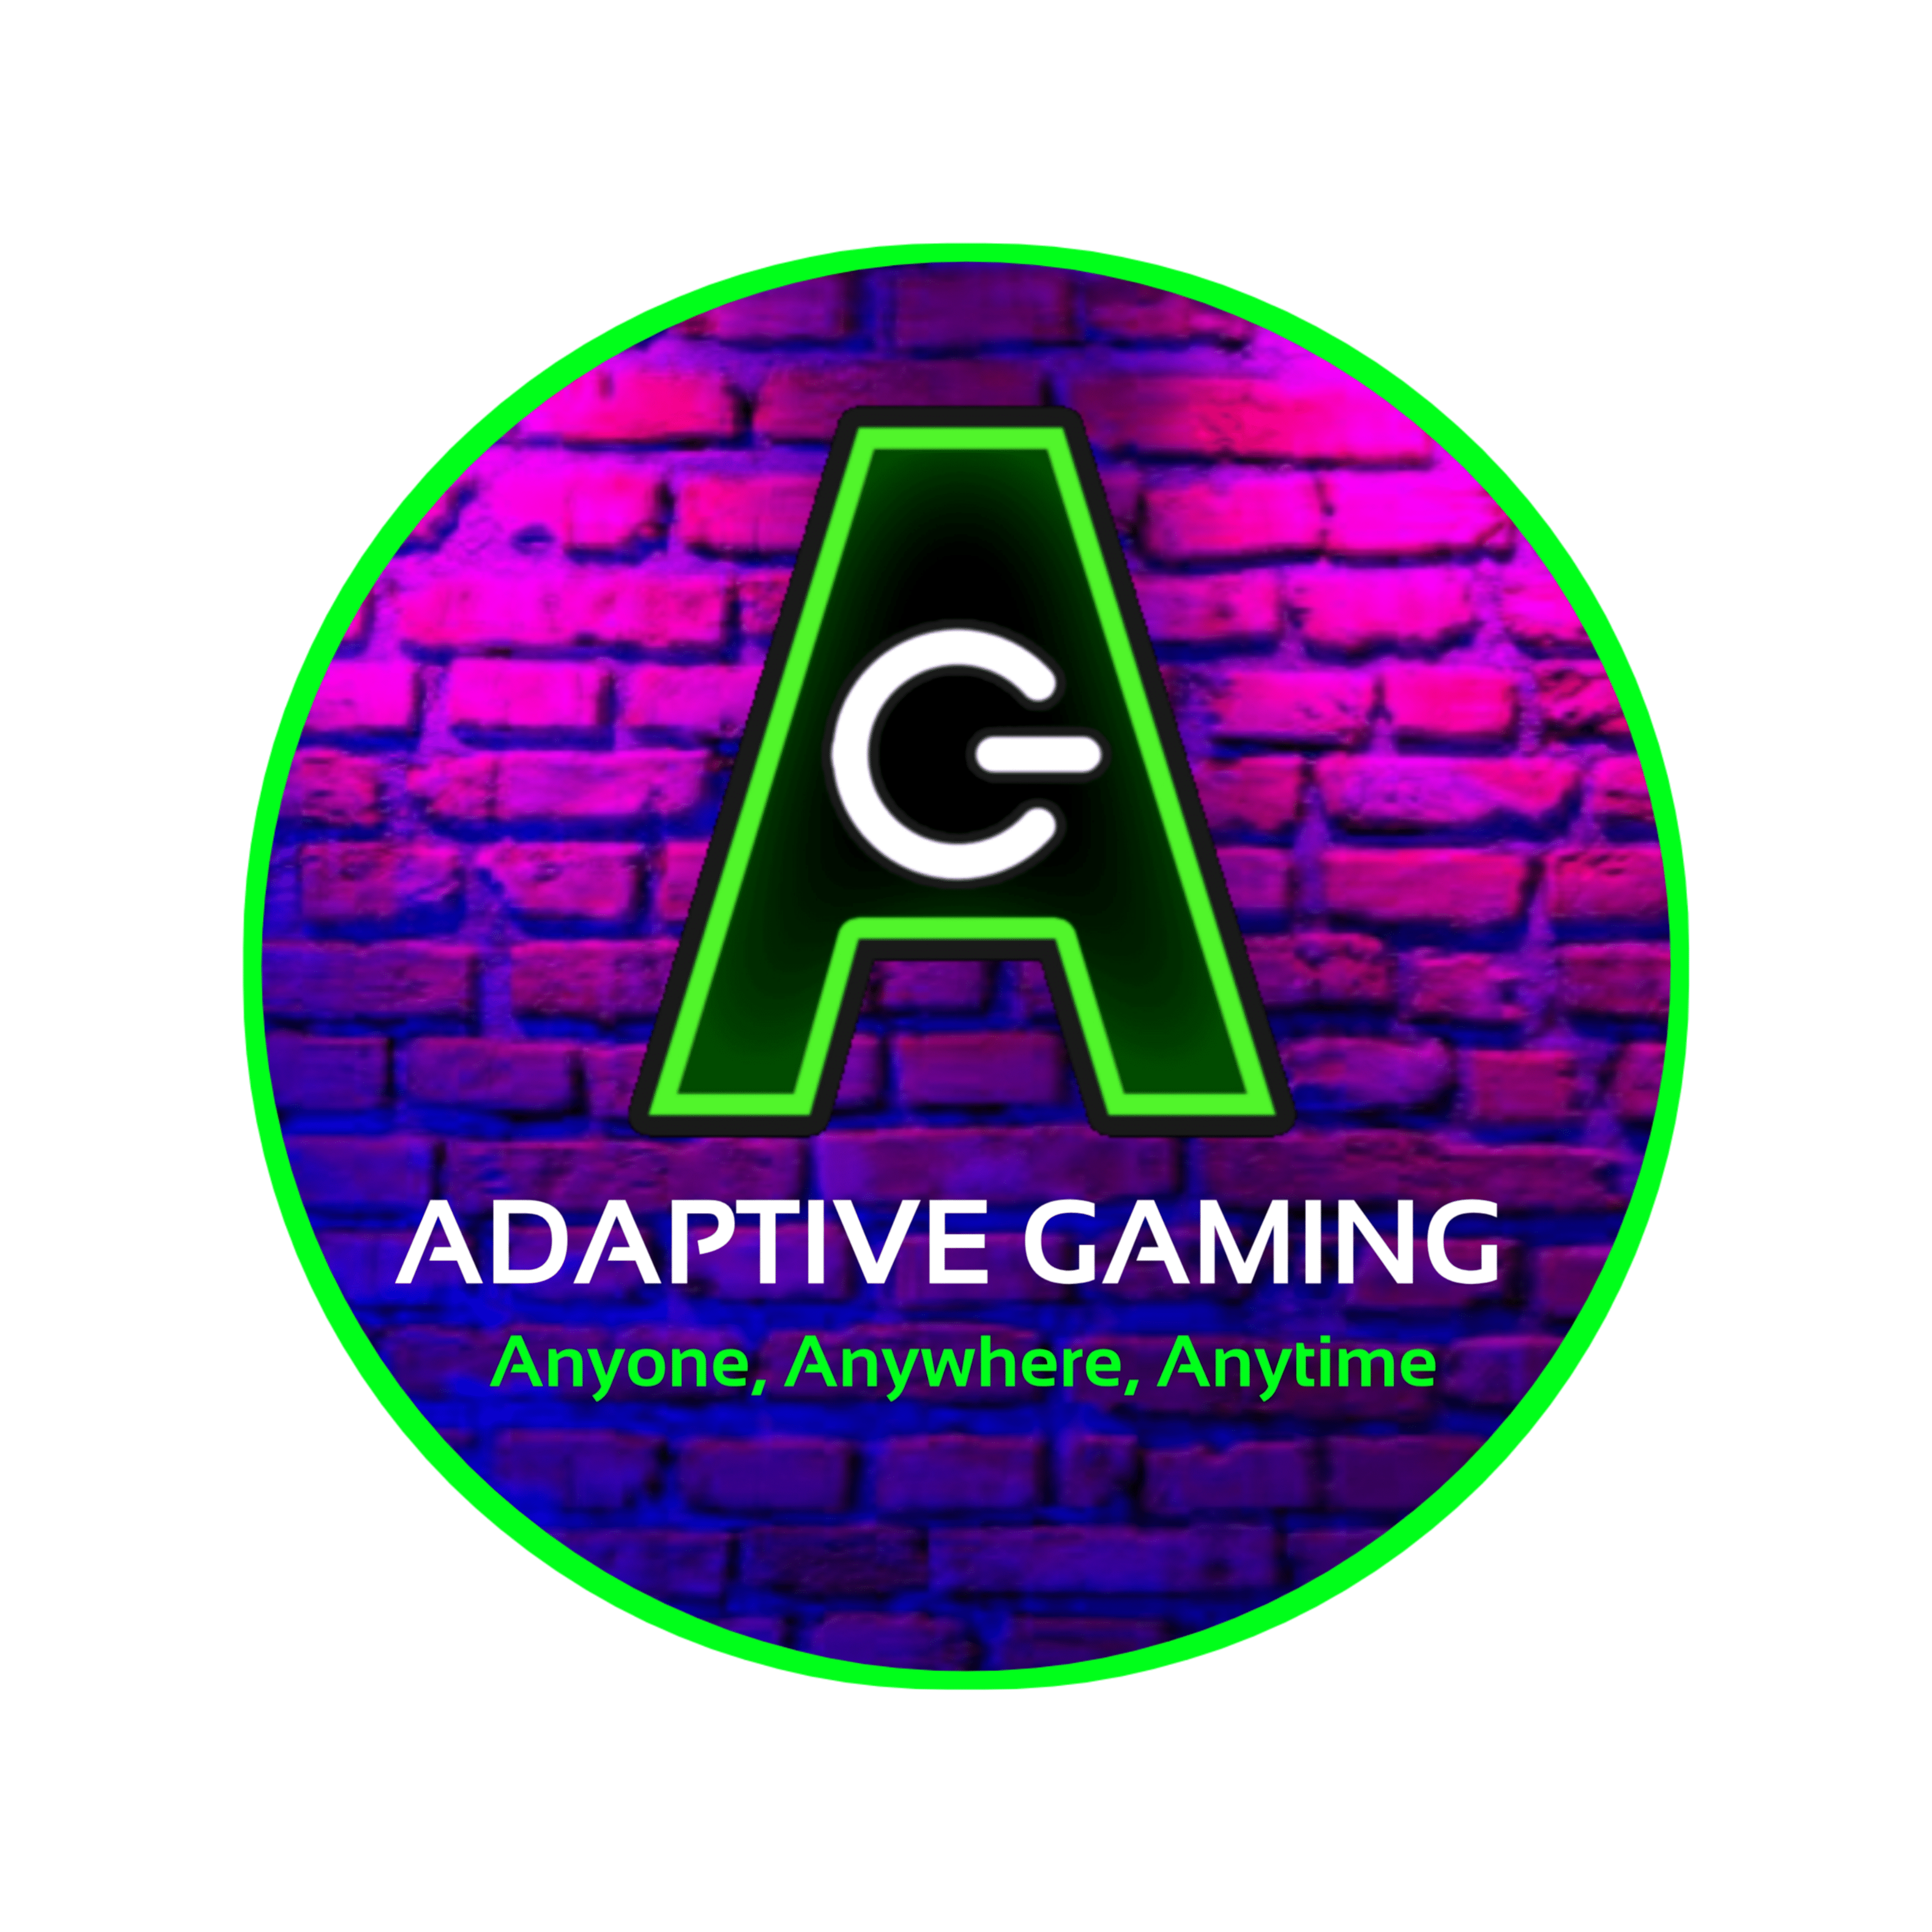 ADAPTIVE GAMING PARTIES & EVENTS